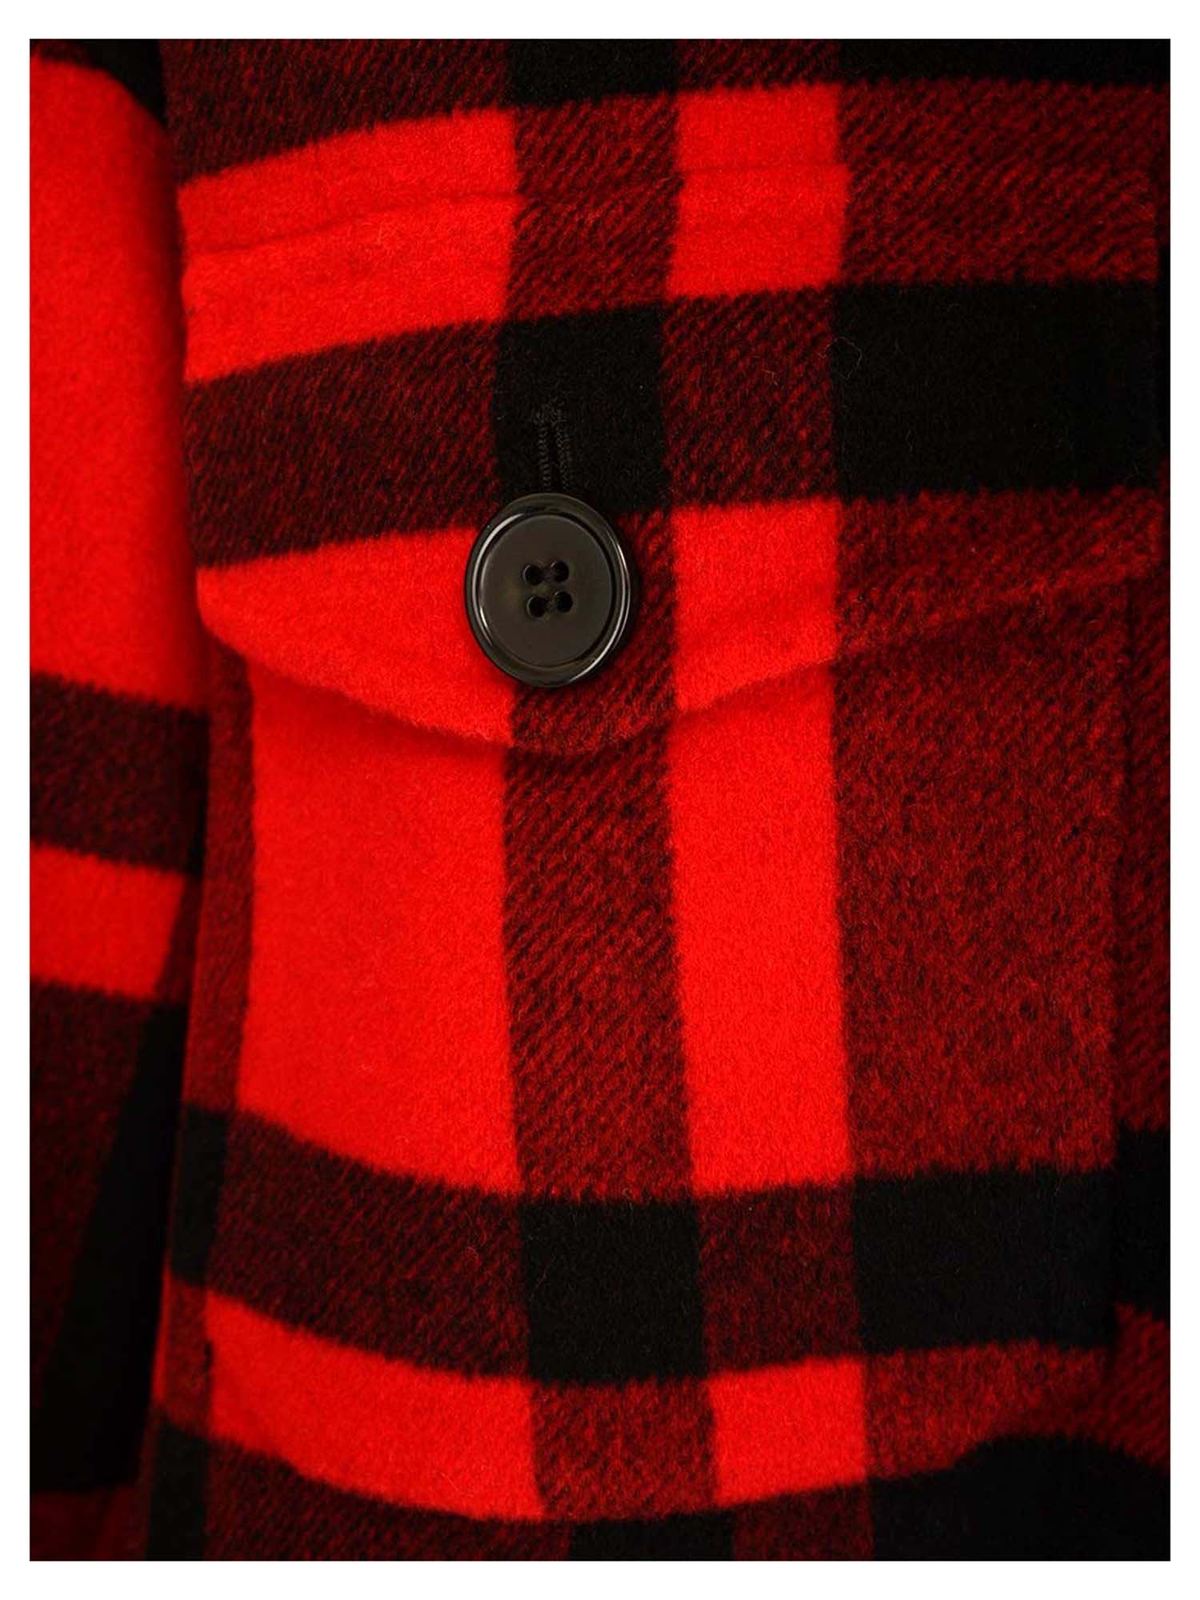 Blazers P.A.R.O.S.H. - Checked overshirt in red and black ...